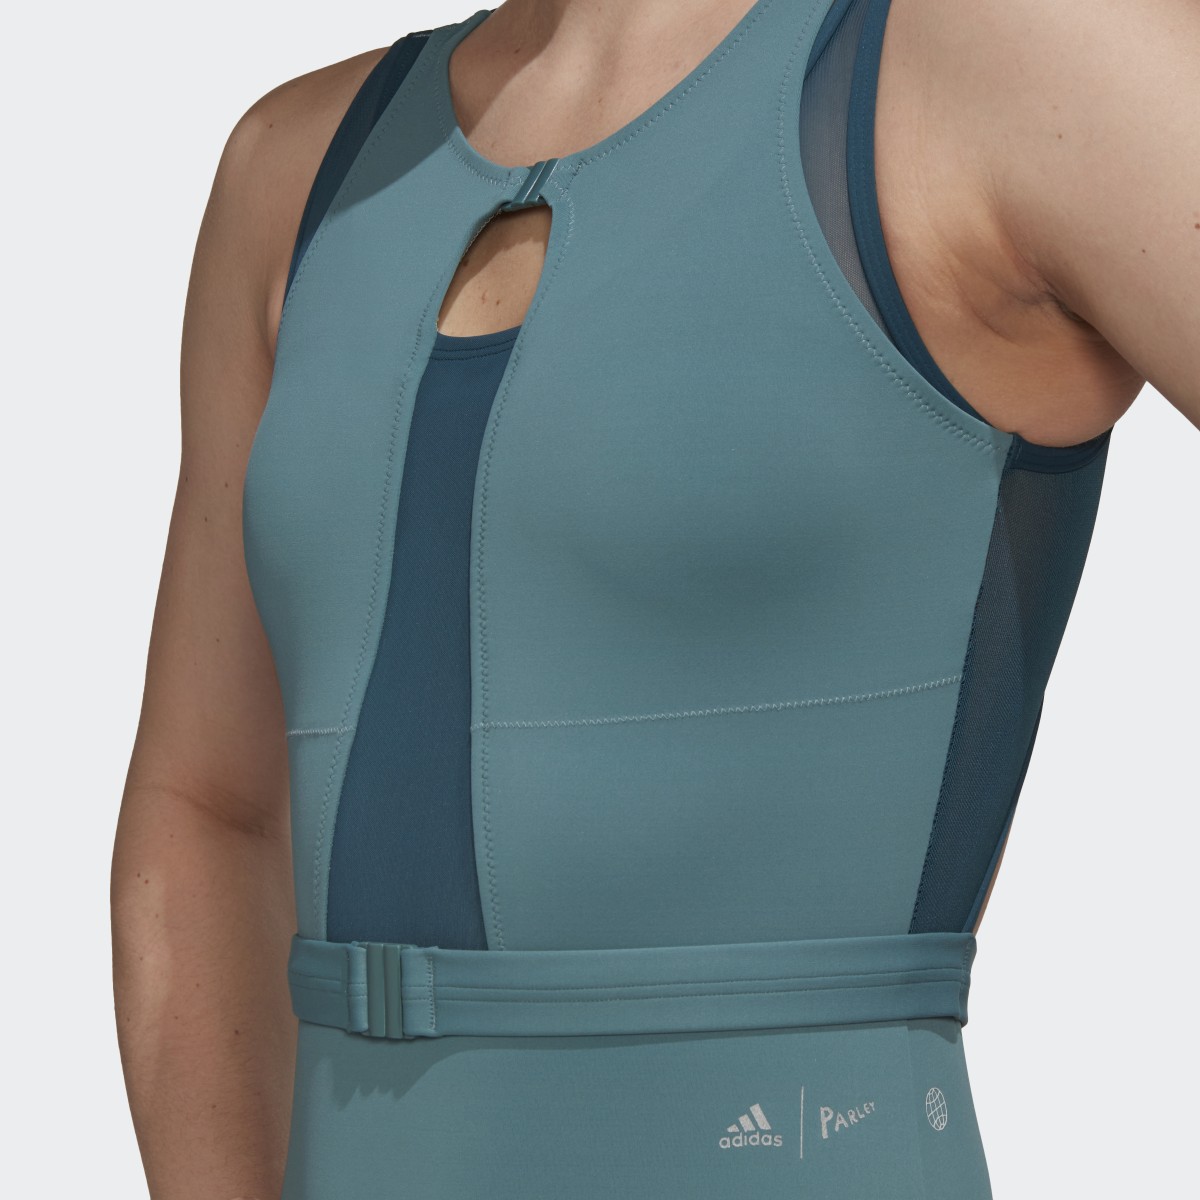 Adidas Parley Swimsuit. 6